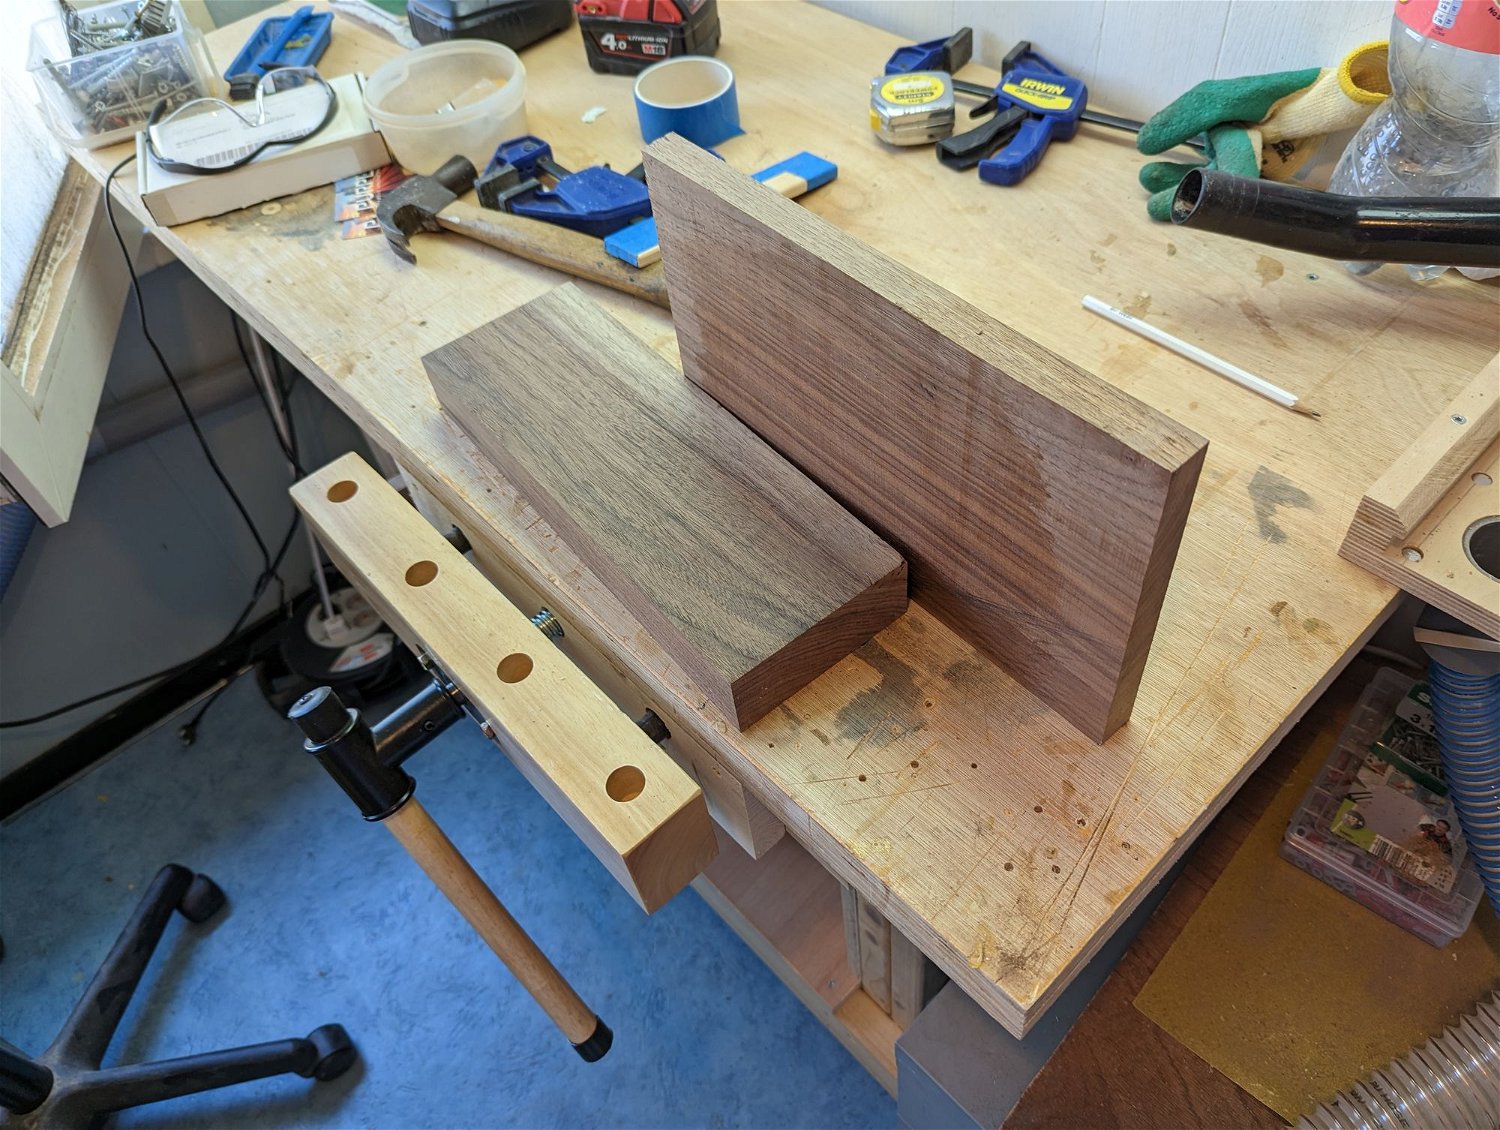 Selected to pieces of walnut; I had the board left over from another project and bought the block for the base. The plan is to recess magnets in the back of the board so the knives are held in place.